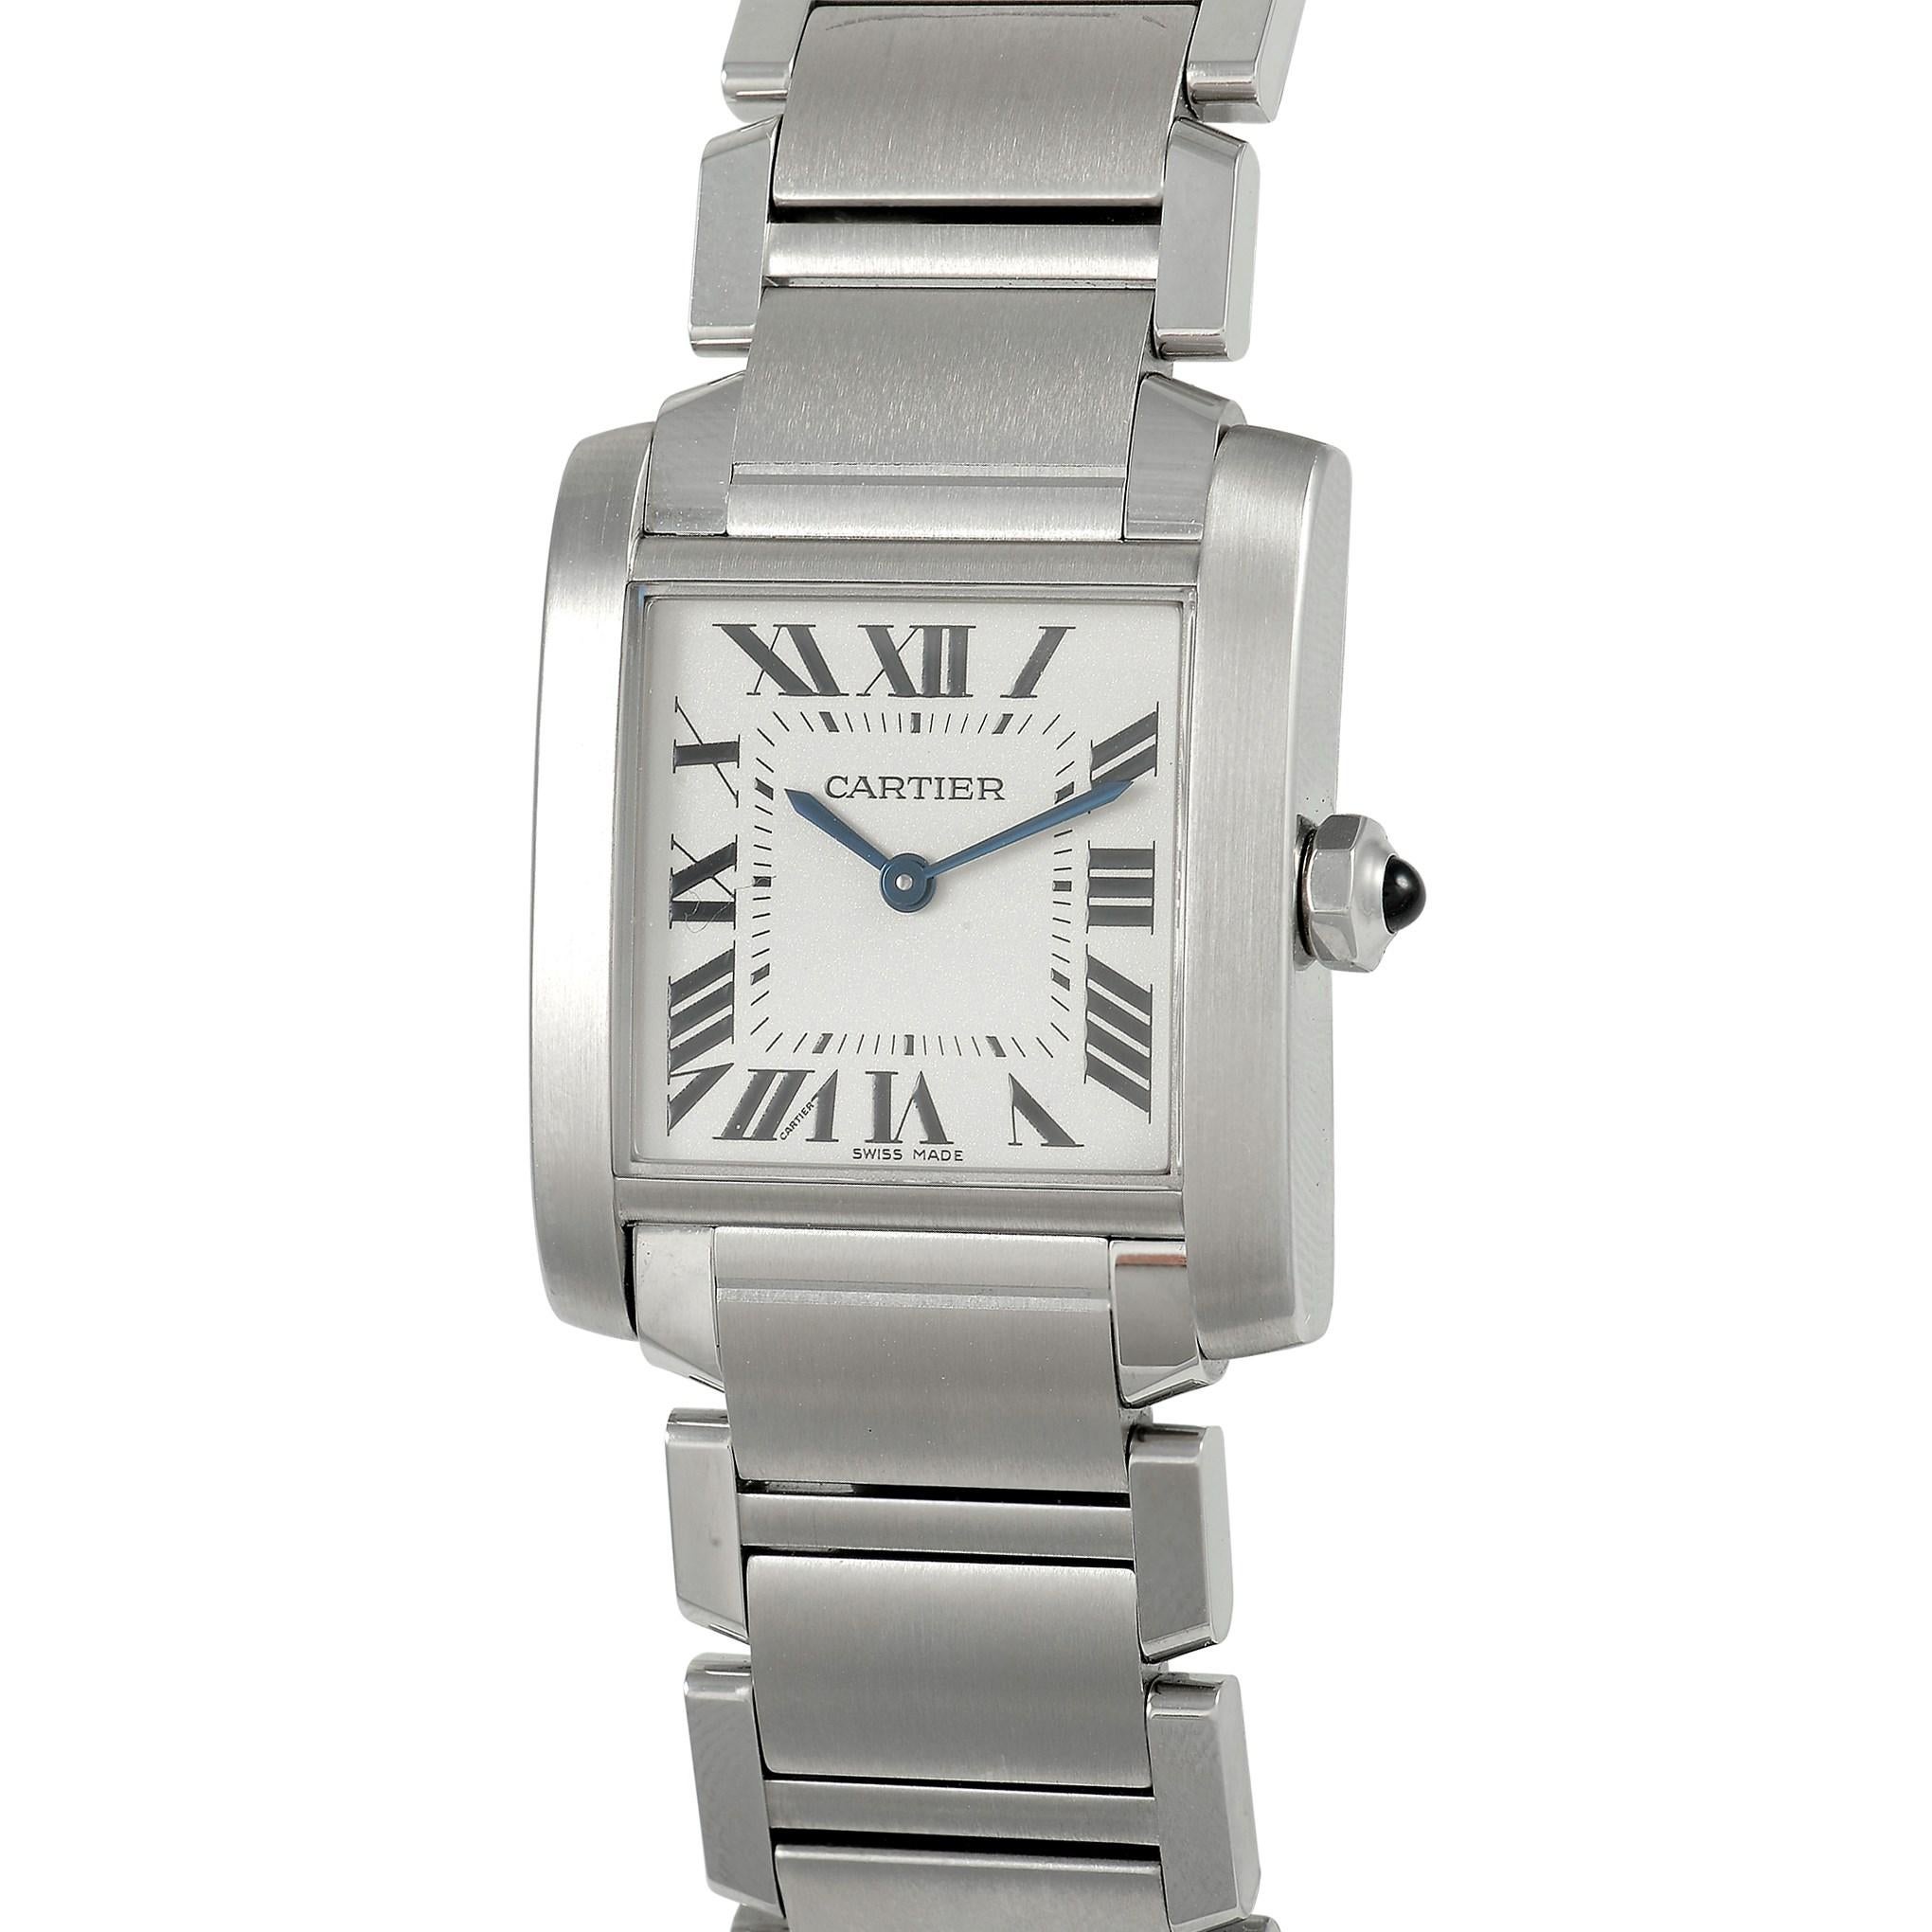 This Cartier Tank Francaise Watch, reference number VSTA 0005, features a stainless steel case that measures 22 mm x 25 mm. The case is presented on a matching stainless steel bracelet with a deployment clasp and features a solid case back engraved